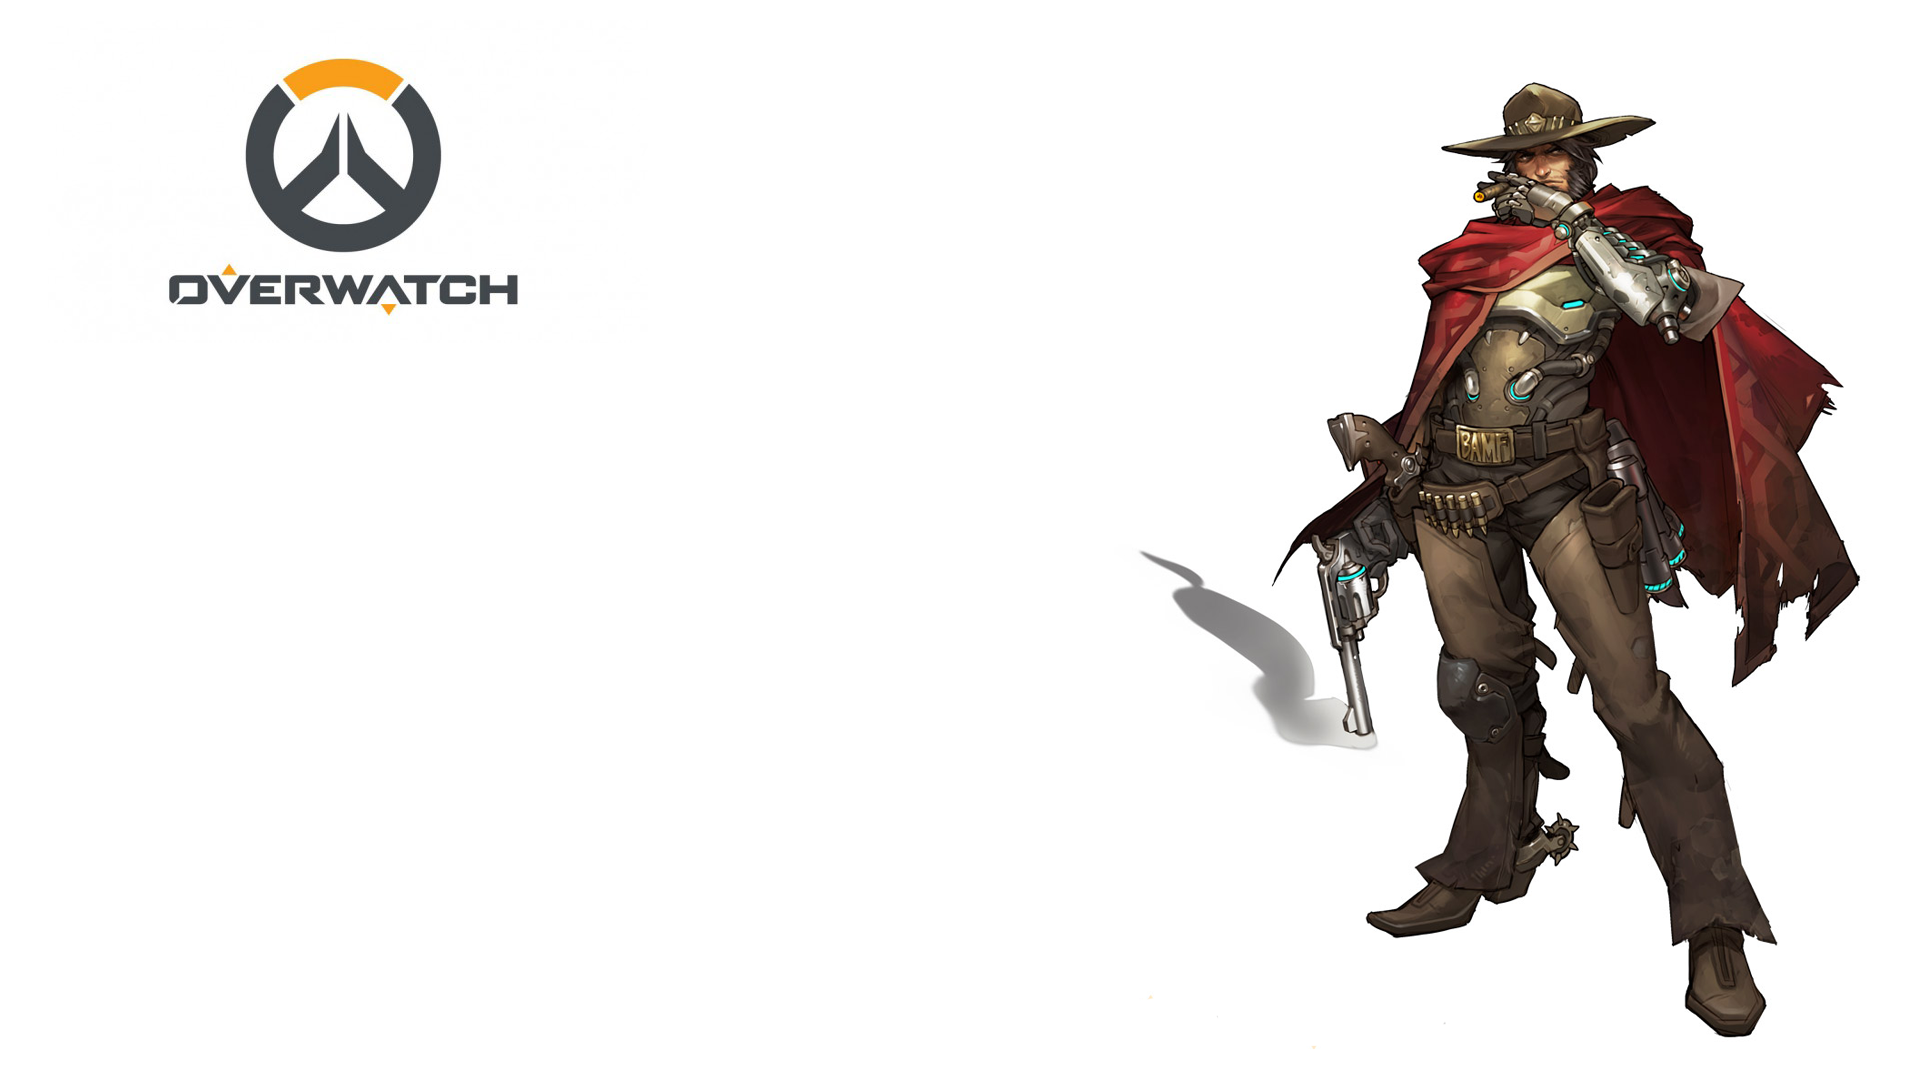 General 1920x1080 Overwatch McRee (Overwatch) simple background PC gaming video game characters